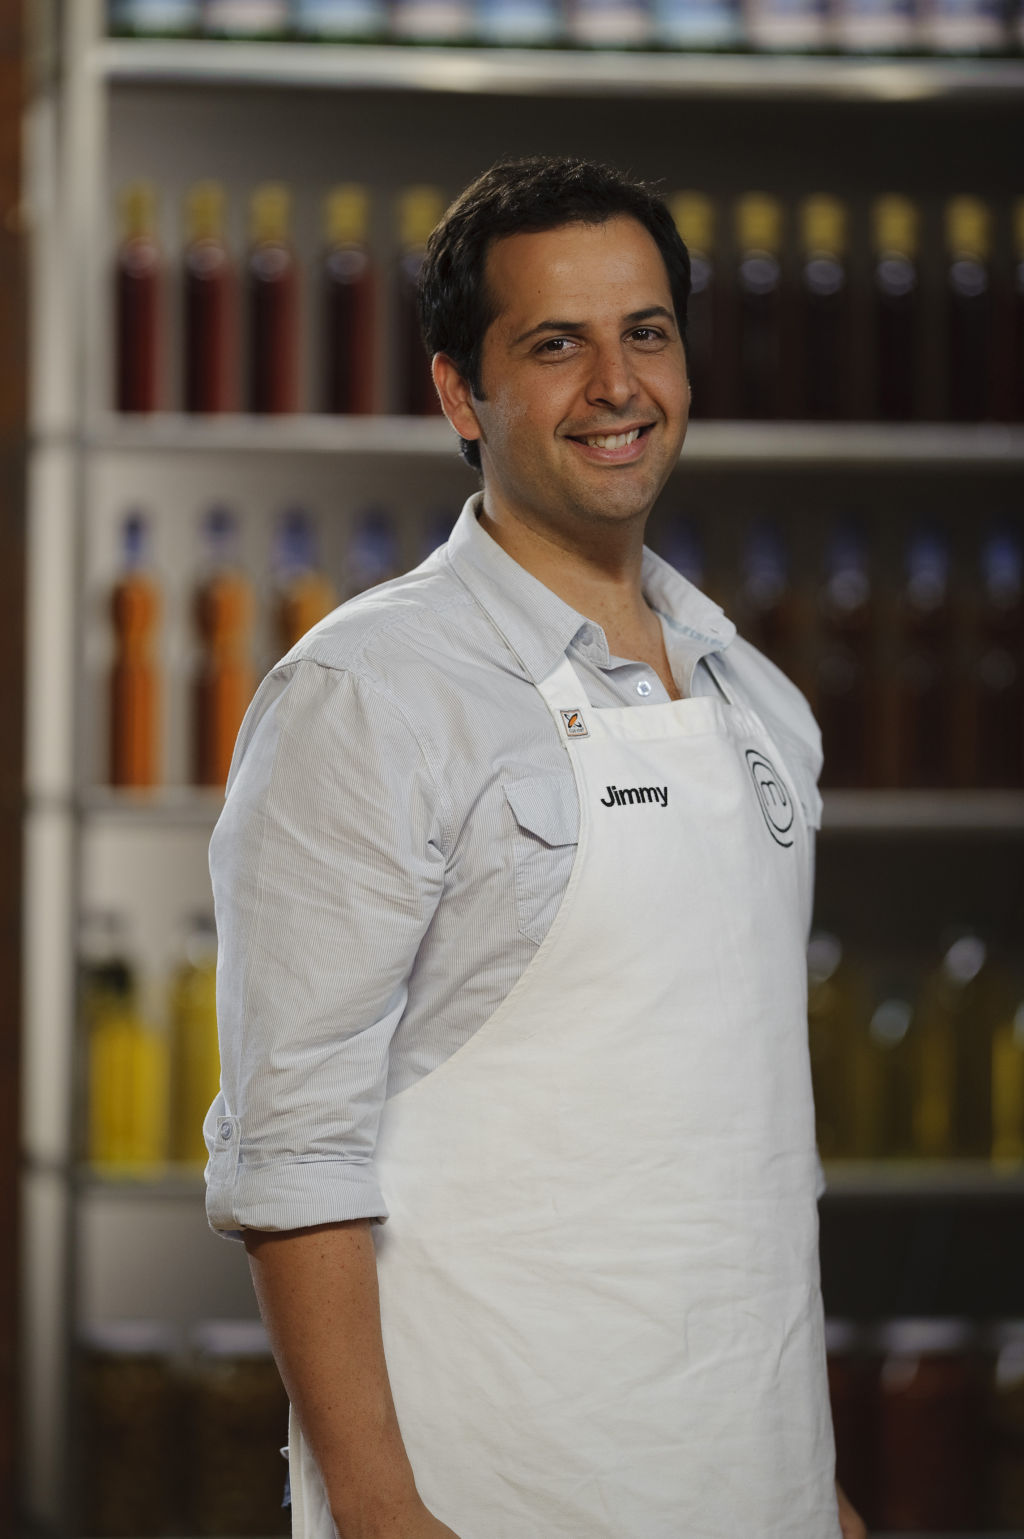 Masterchef 2010 contestant Jimmy Seervai. Photo Supplied. SHD News 9 July 2010